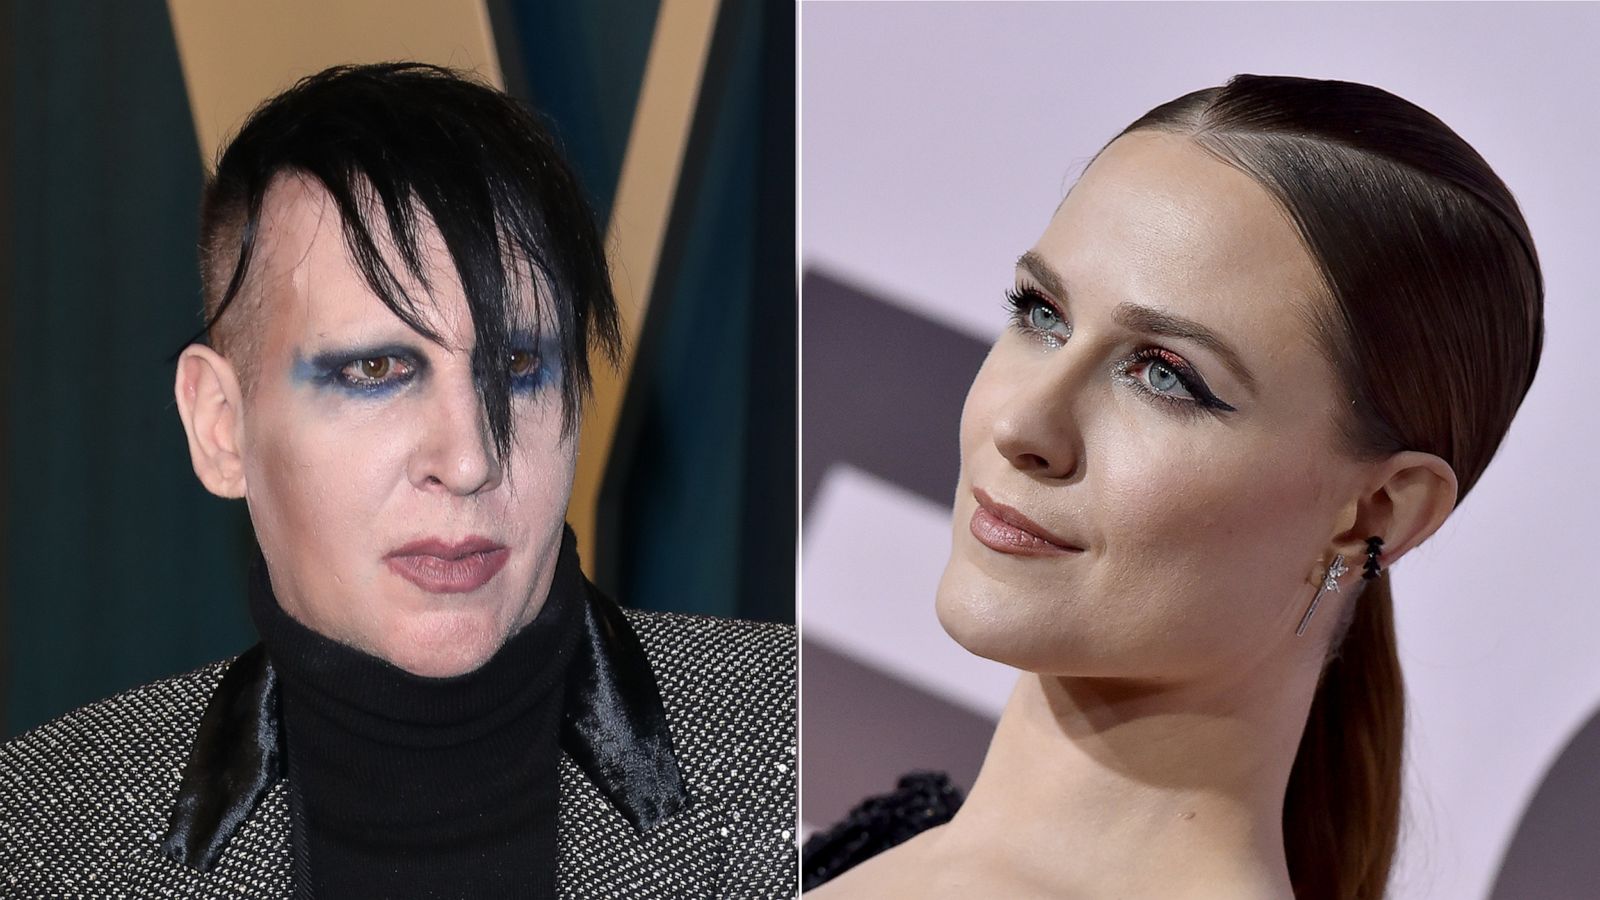 Singer Marilyn Manson dropped by record label after abuse claims